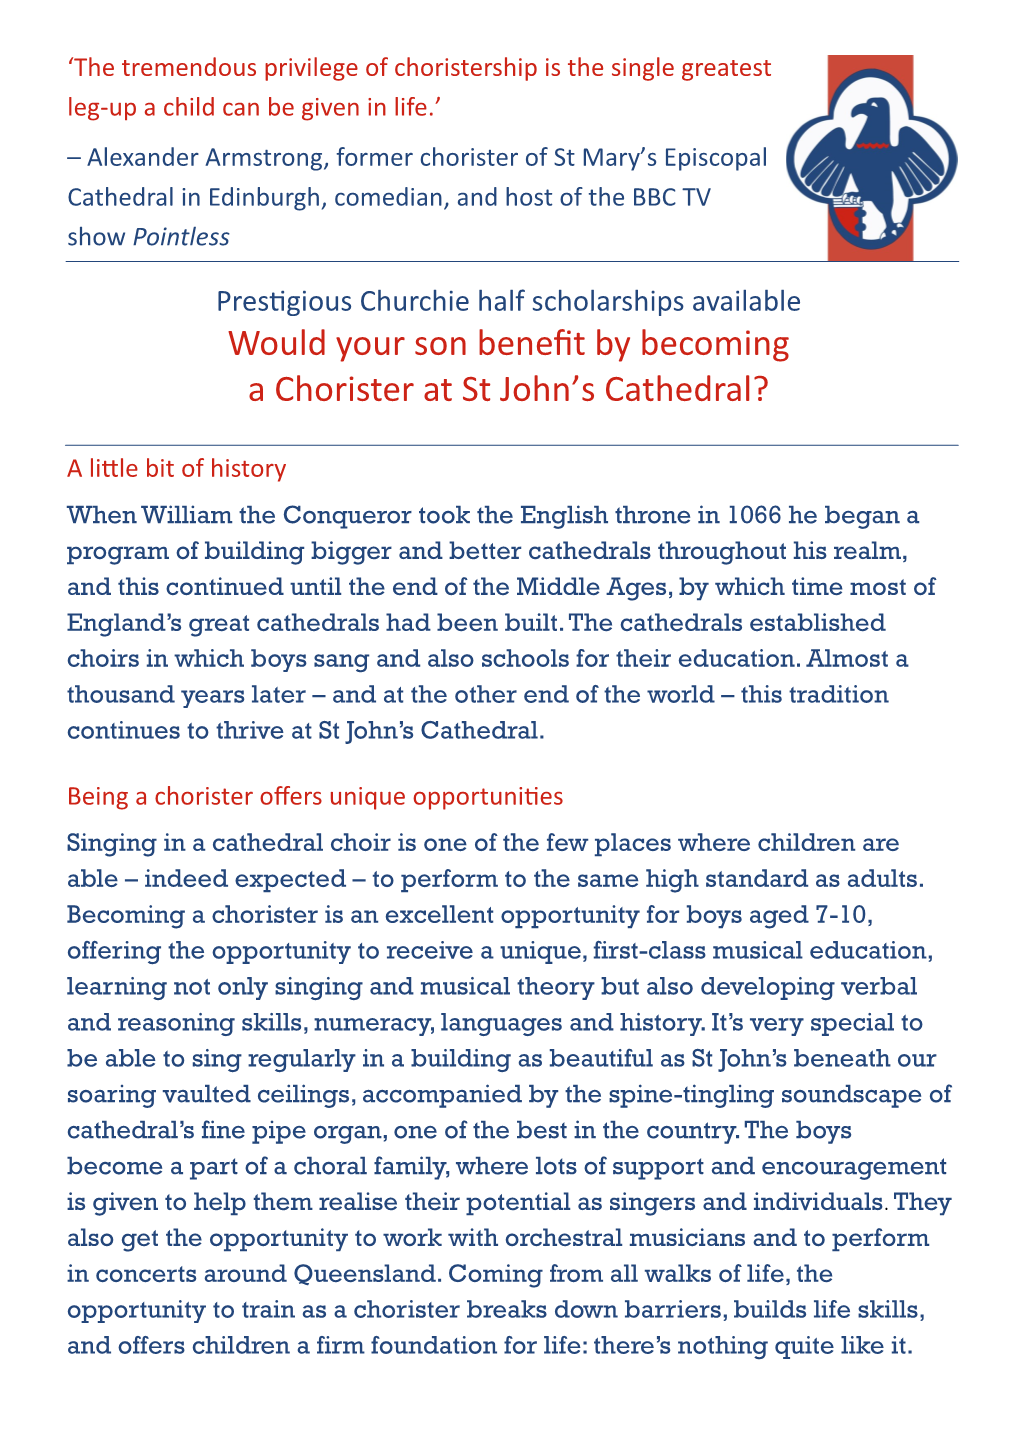 Would Your Son Benefit by Becoming a Chorister at St John's Cathedral?